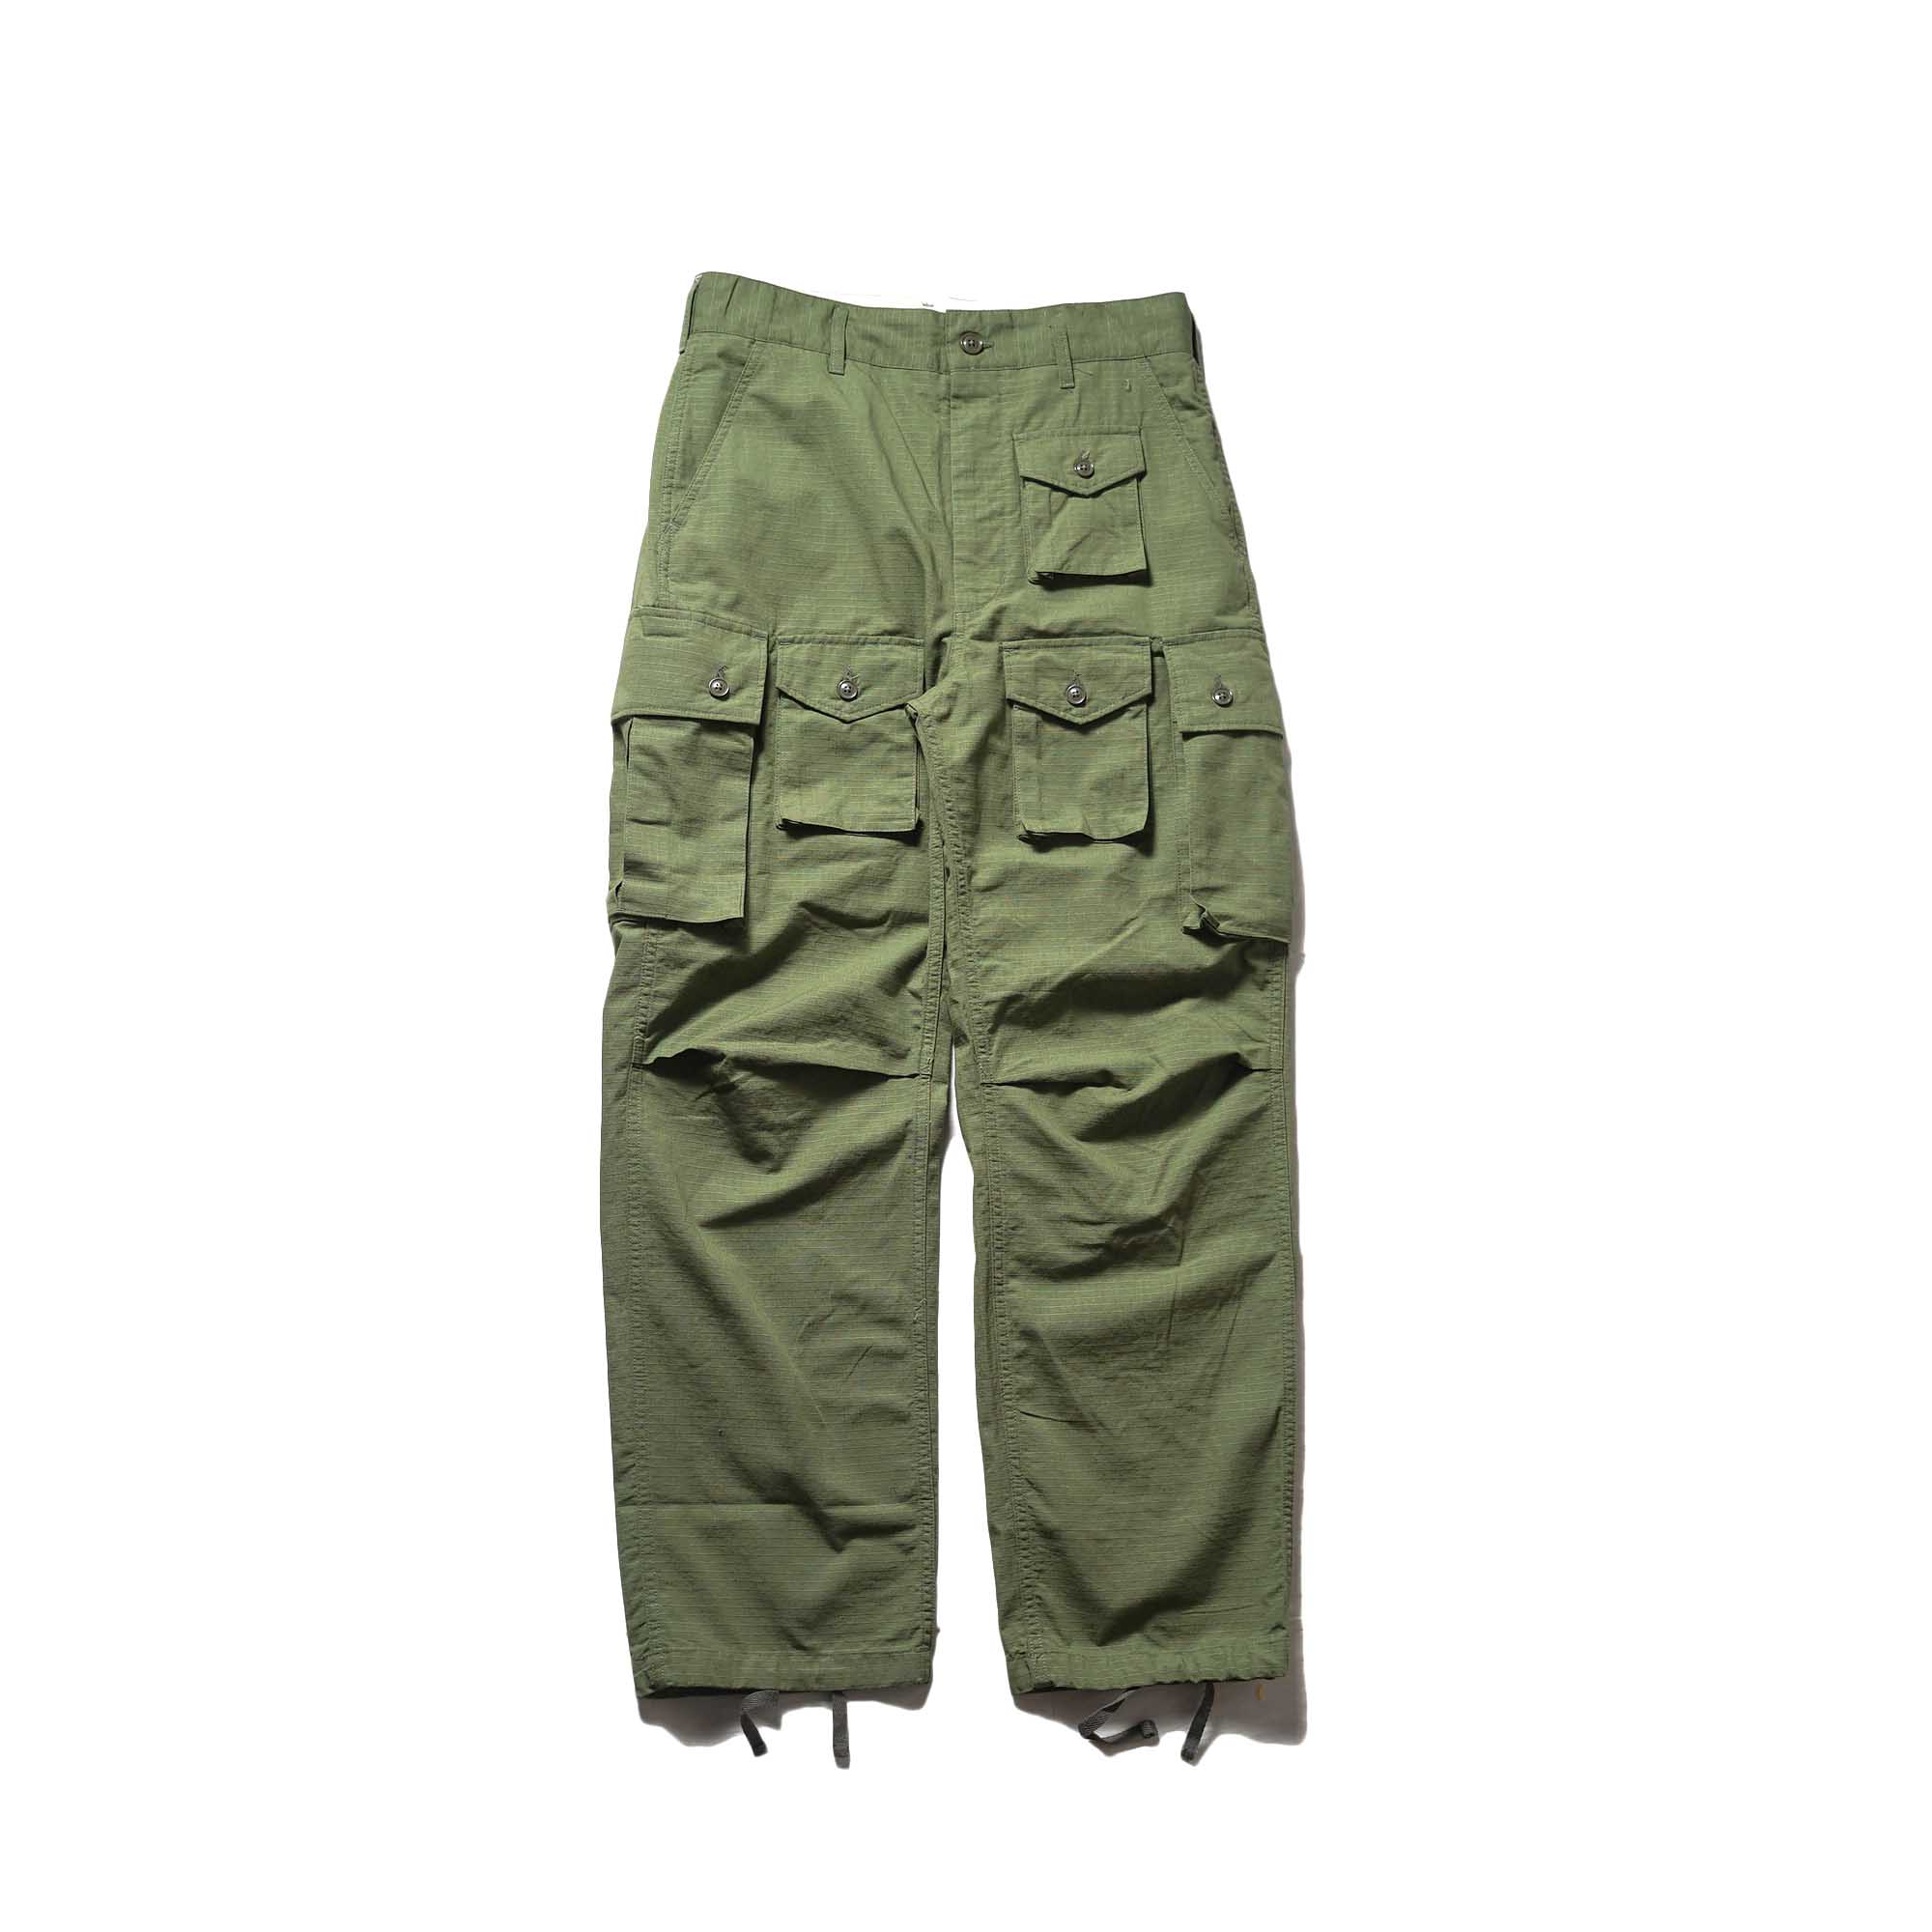 Engineered Garments / FA Pant-Cotton Ripstop (Olive)